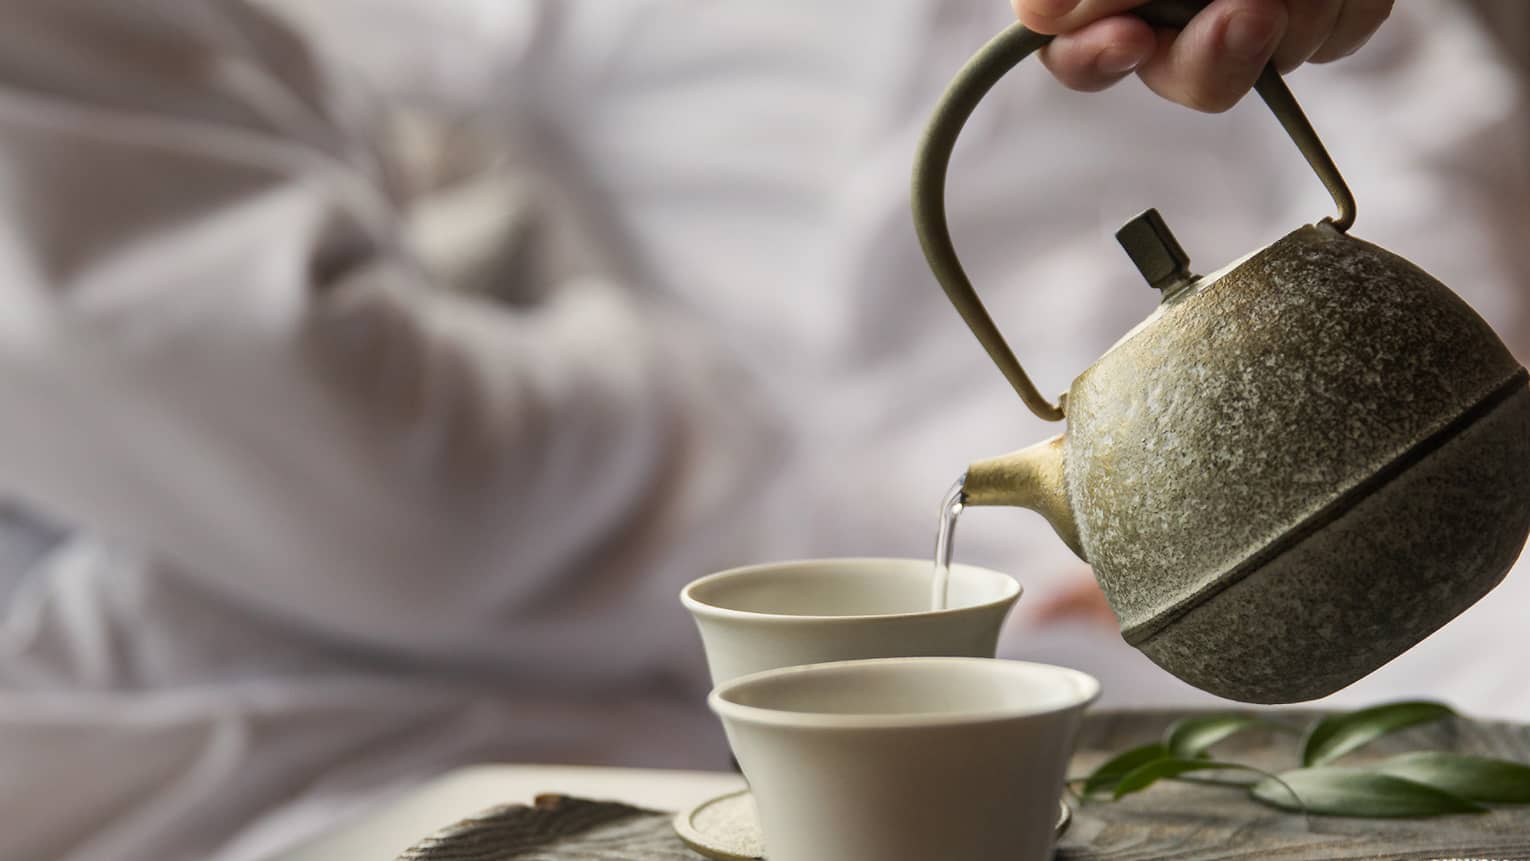 Two guests sit in hotel room as someone pours traditional Japanese tea on tray